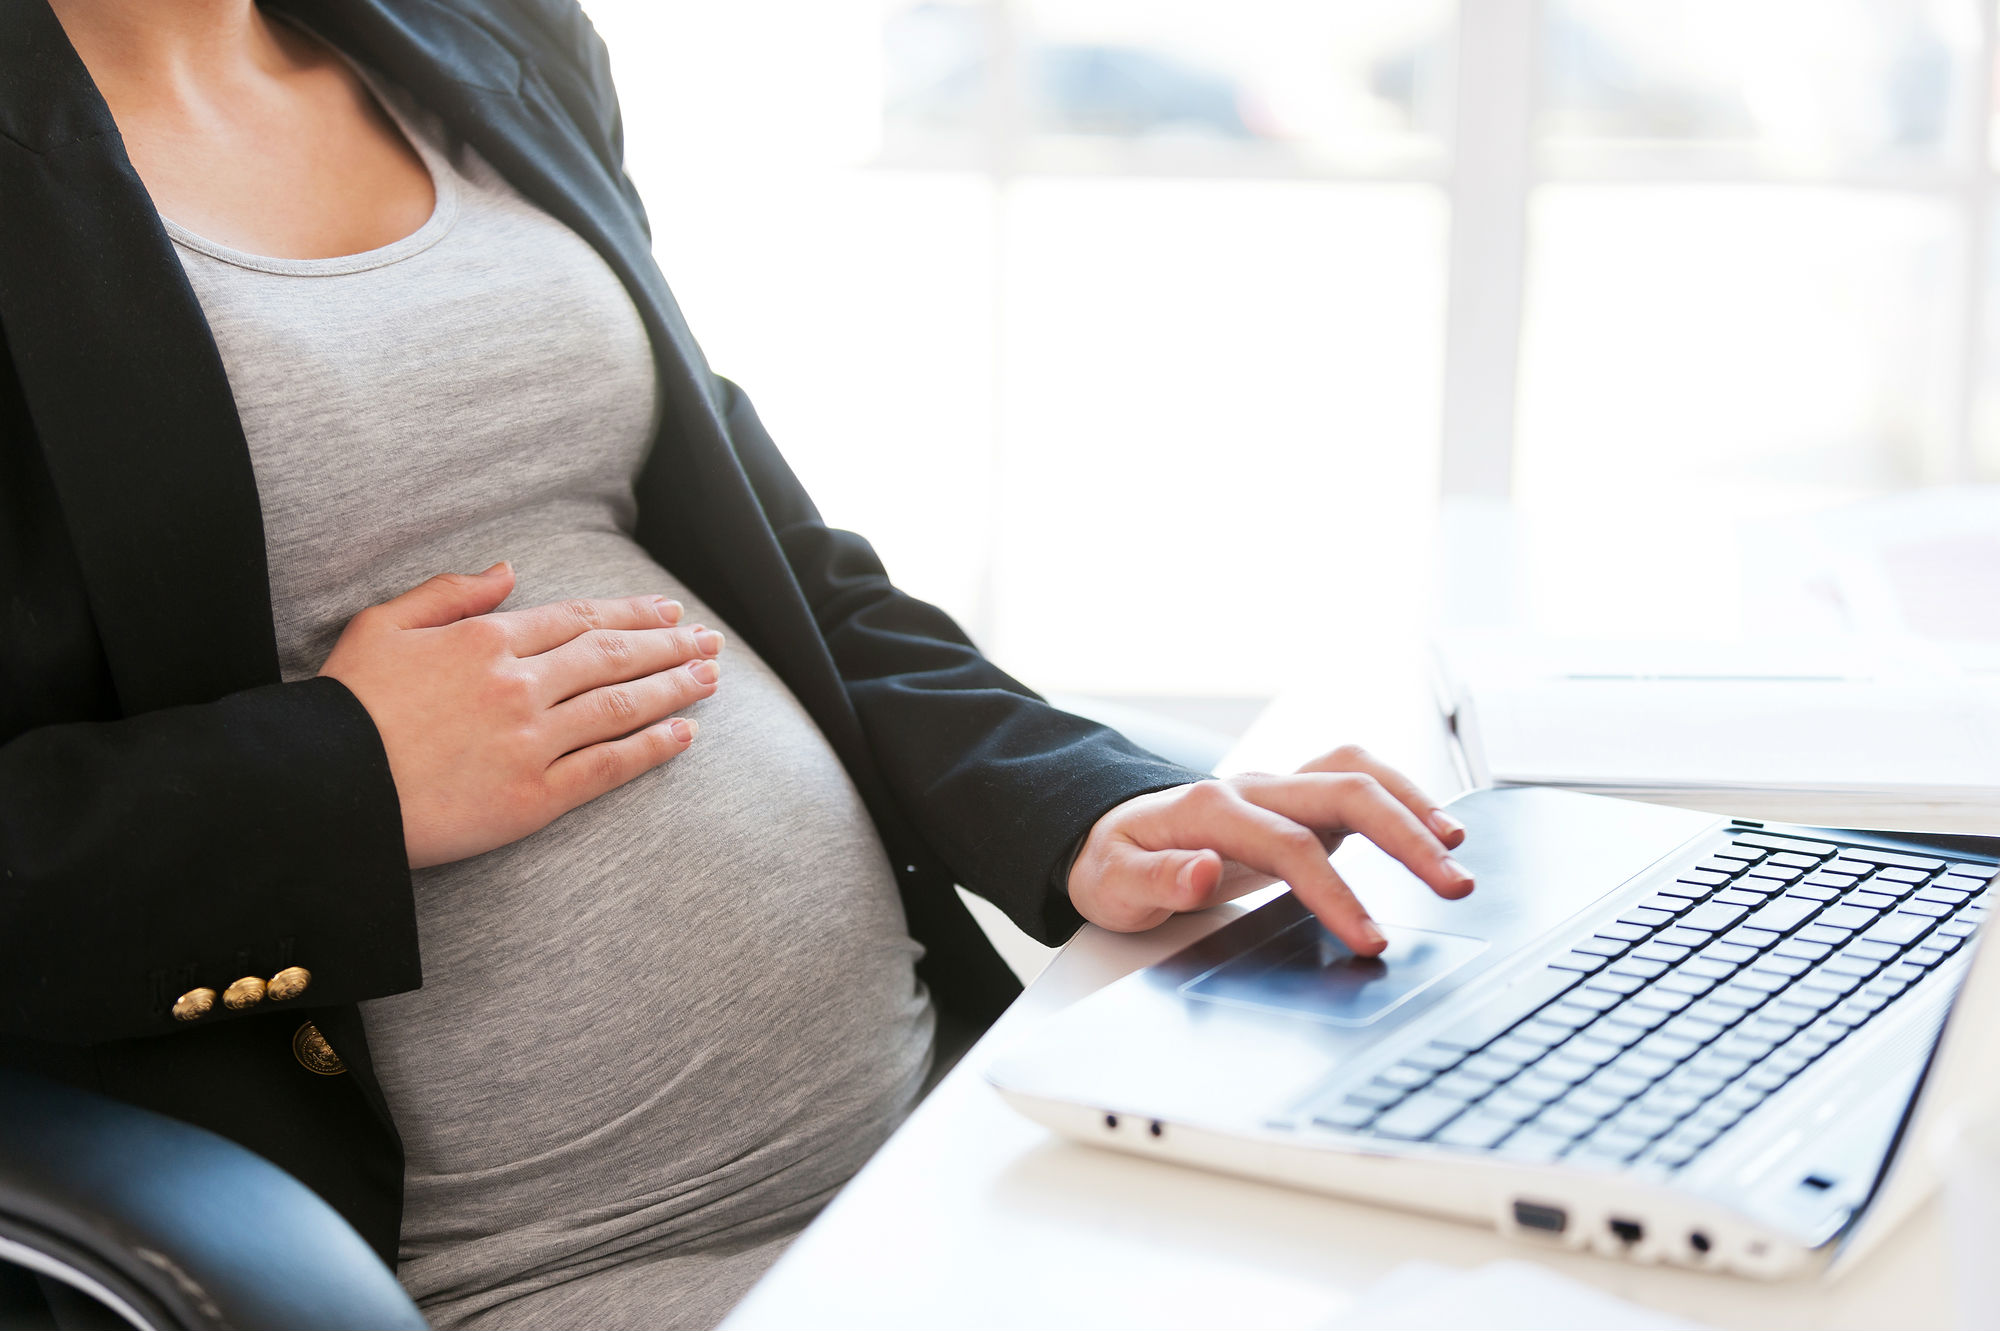 Maternity leave: Striking the right balance – Searching for a Happy Medium for Both Employers and Employees